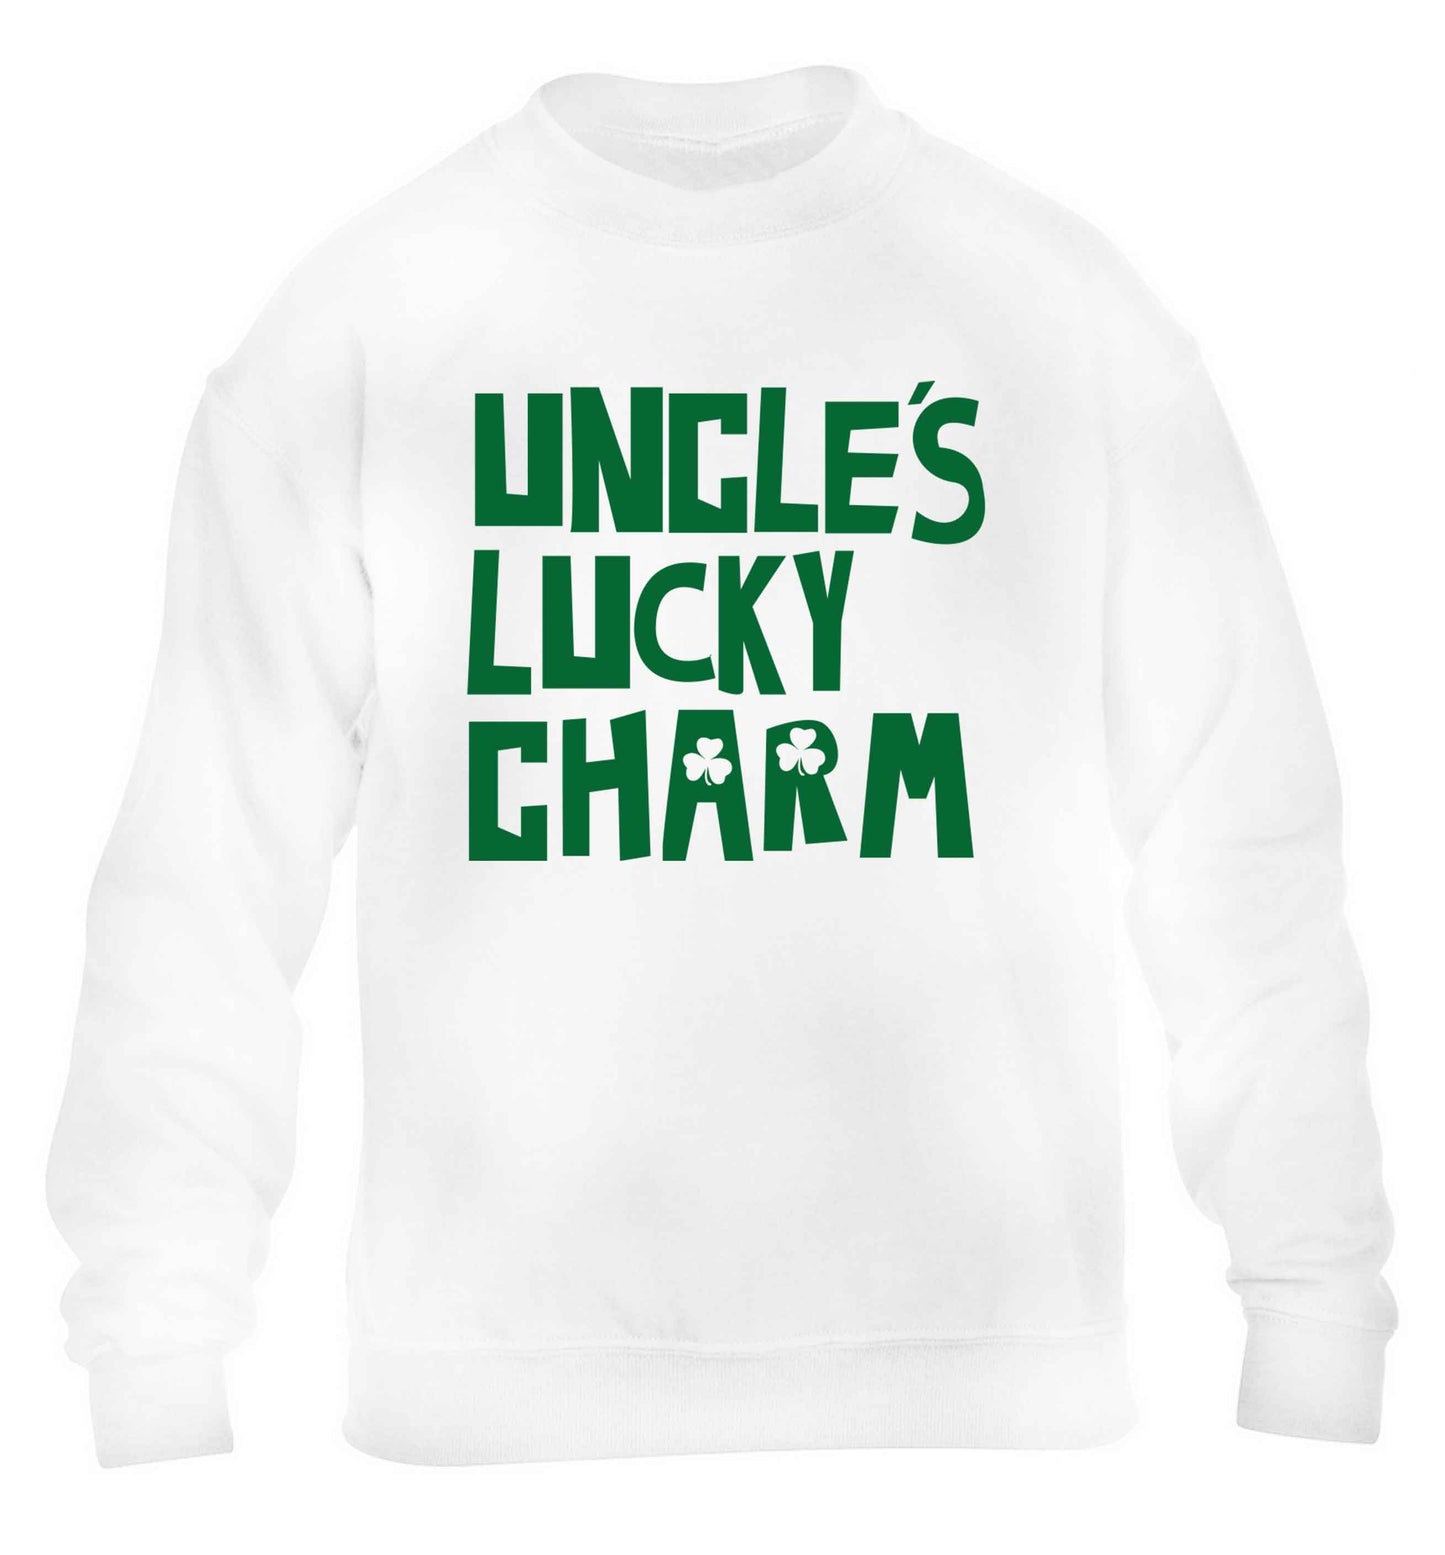 Uncles lucky charm children's white sweater 12-13 Years